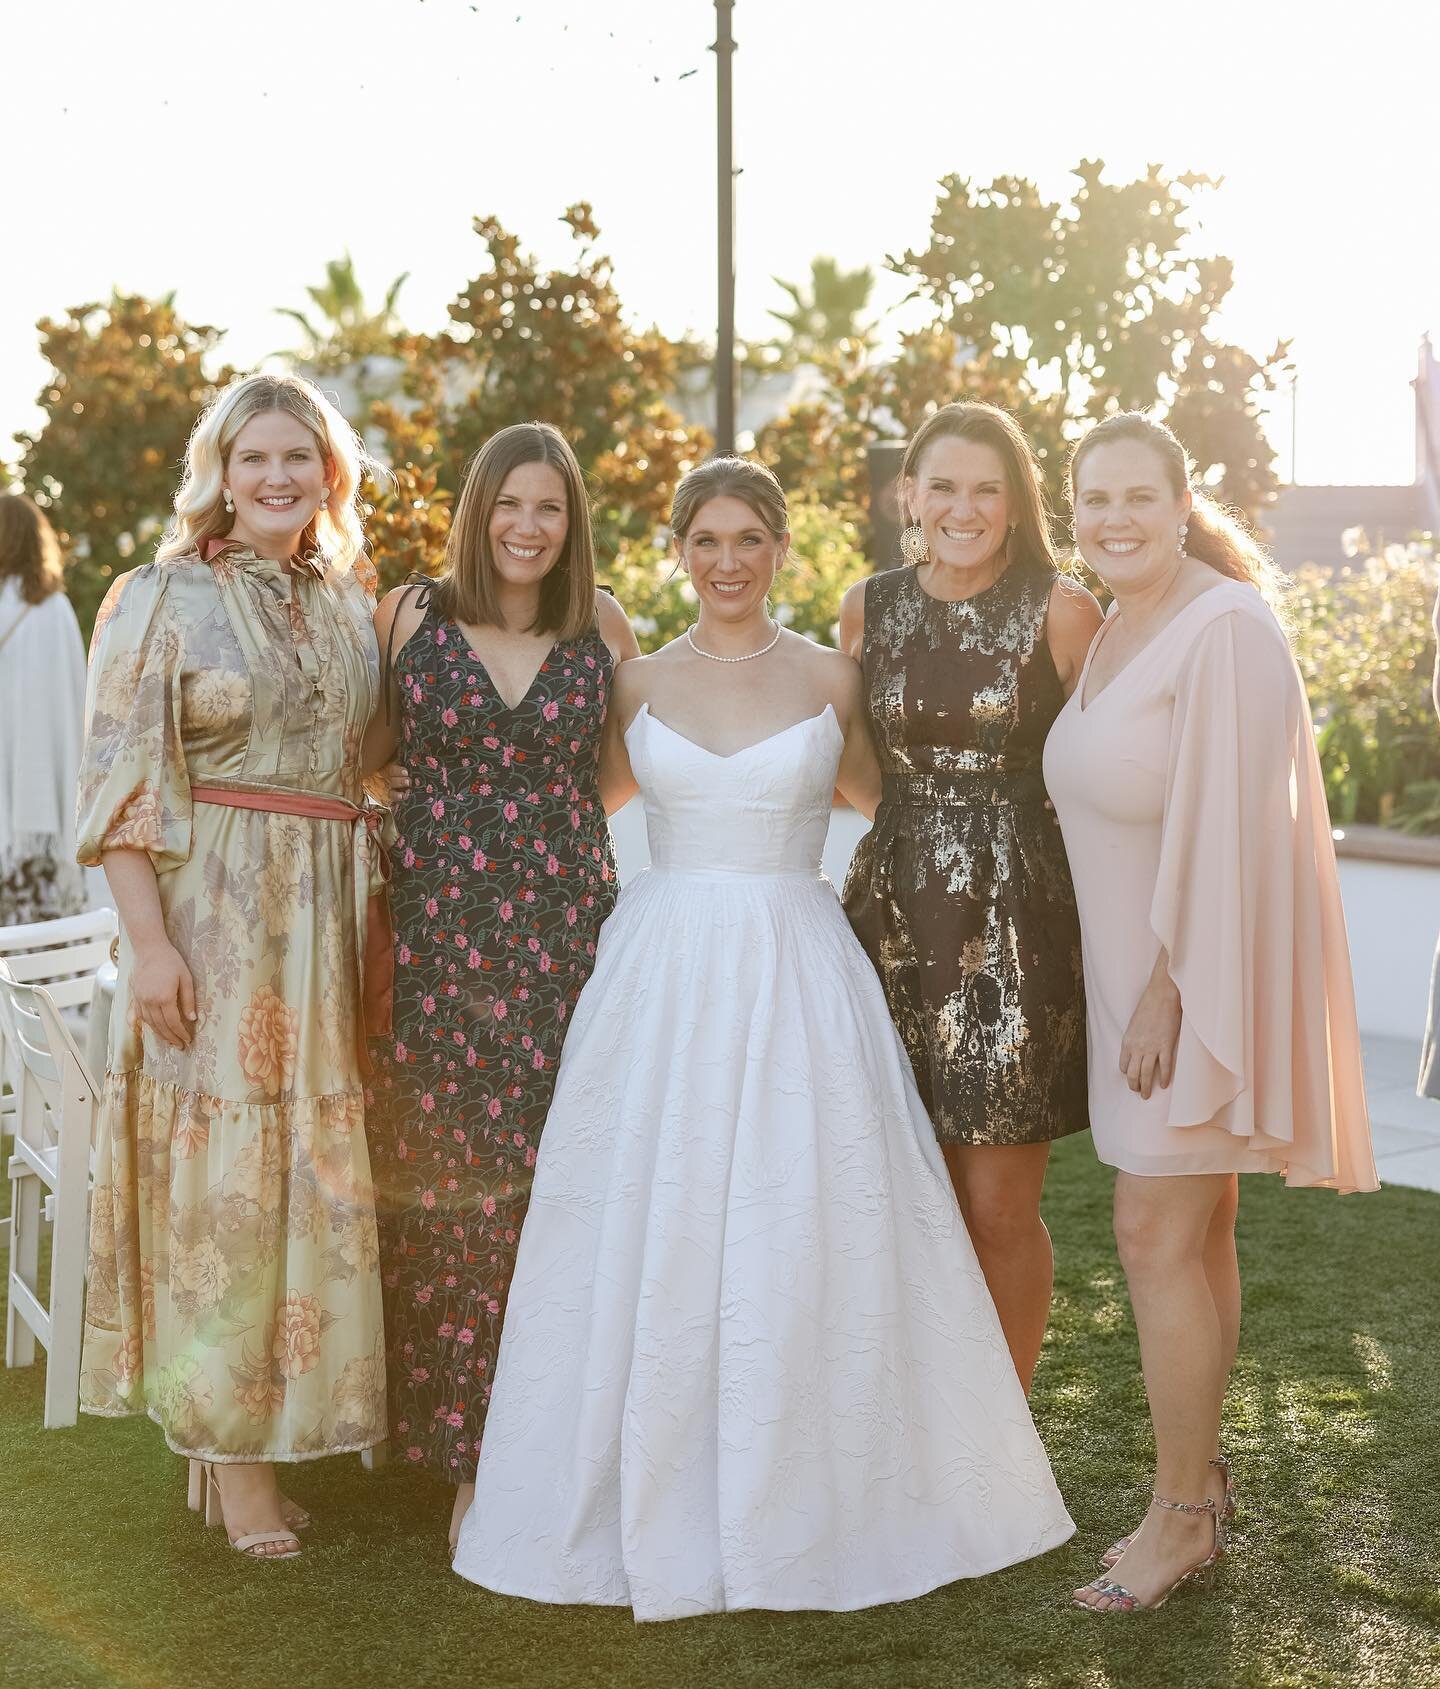 Our favorite type of wedding is a Belle wedding! Reminiscing on @meghan_belleevent's gorgeous wedding day in California! ✨

Thank you @kellyhornberger_photo for capturing our team on such a special day! 

-

#BelleEvents #WeddingsInHouston #UniqueWed